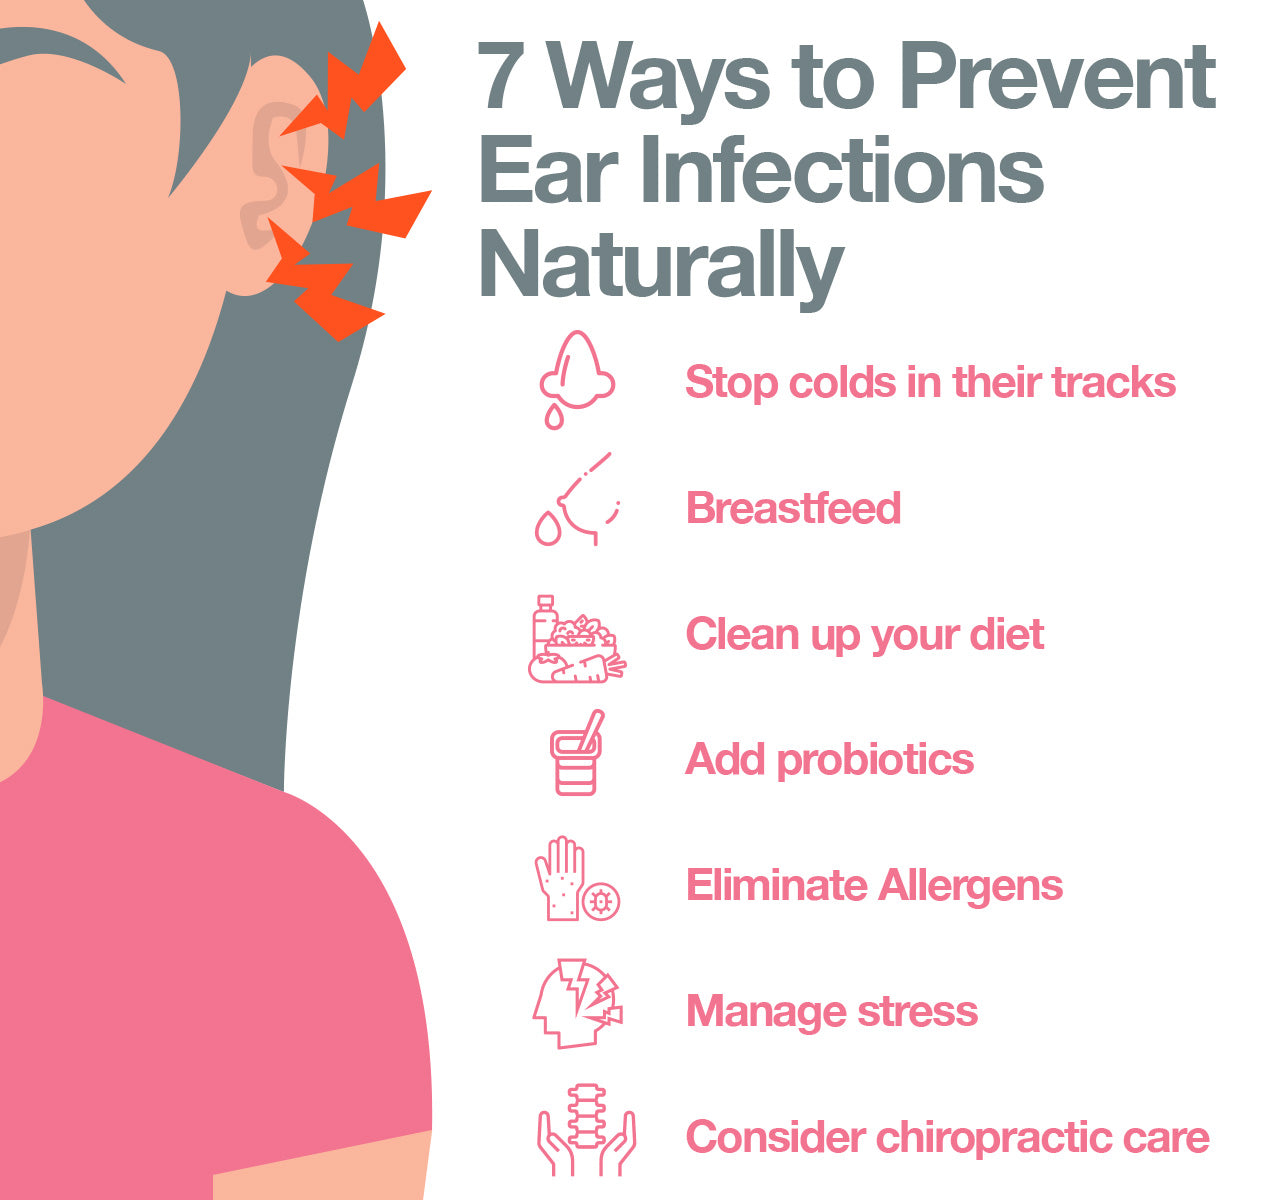 7 Ways to Prevent Ear Infections Naturally